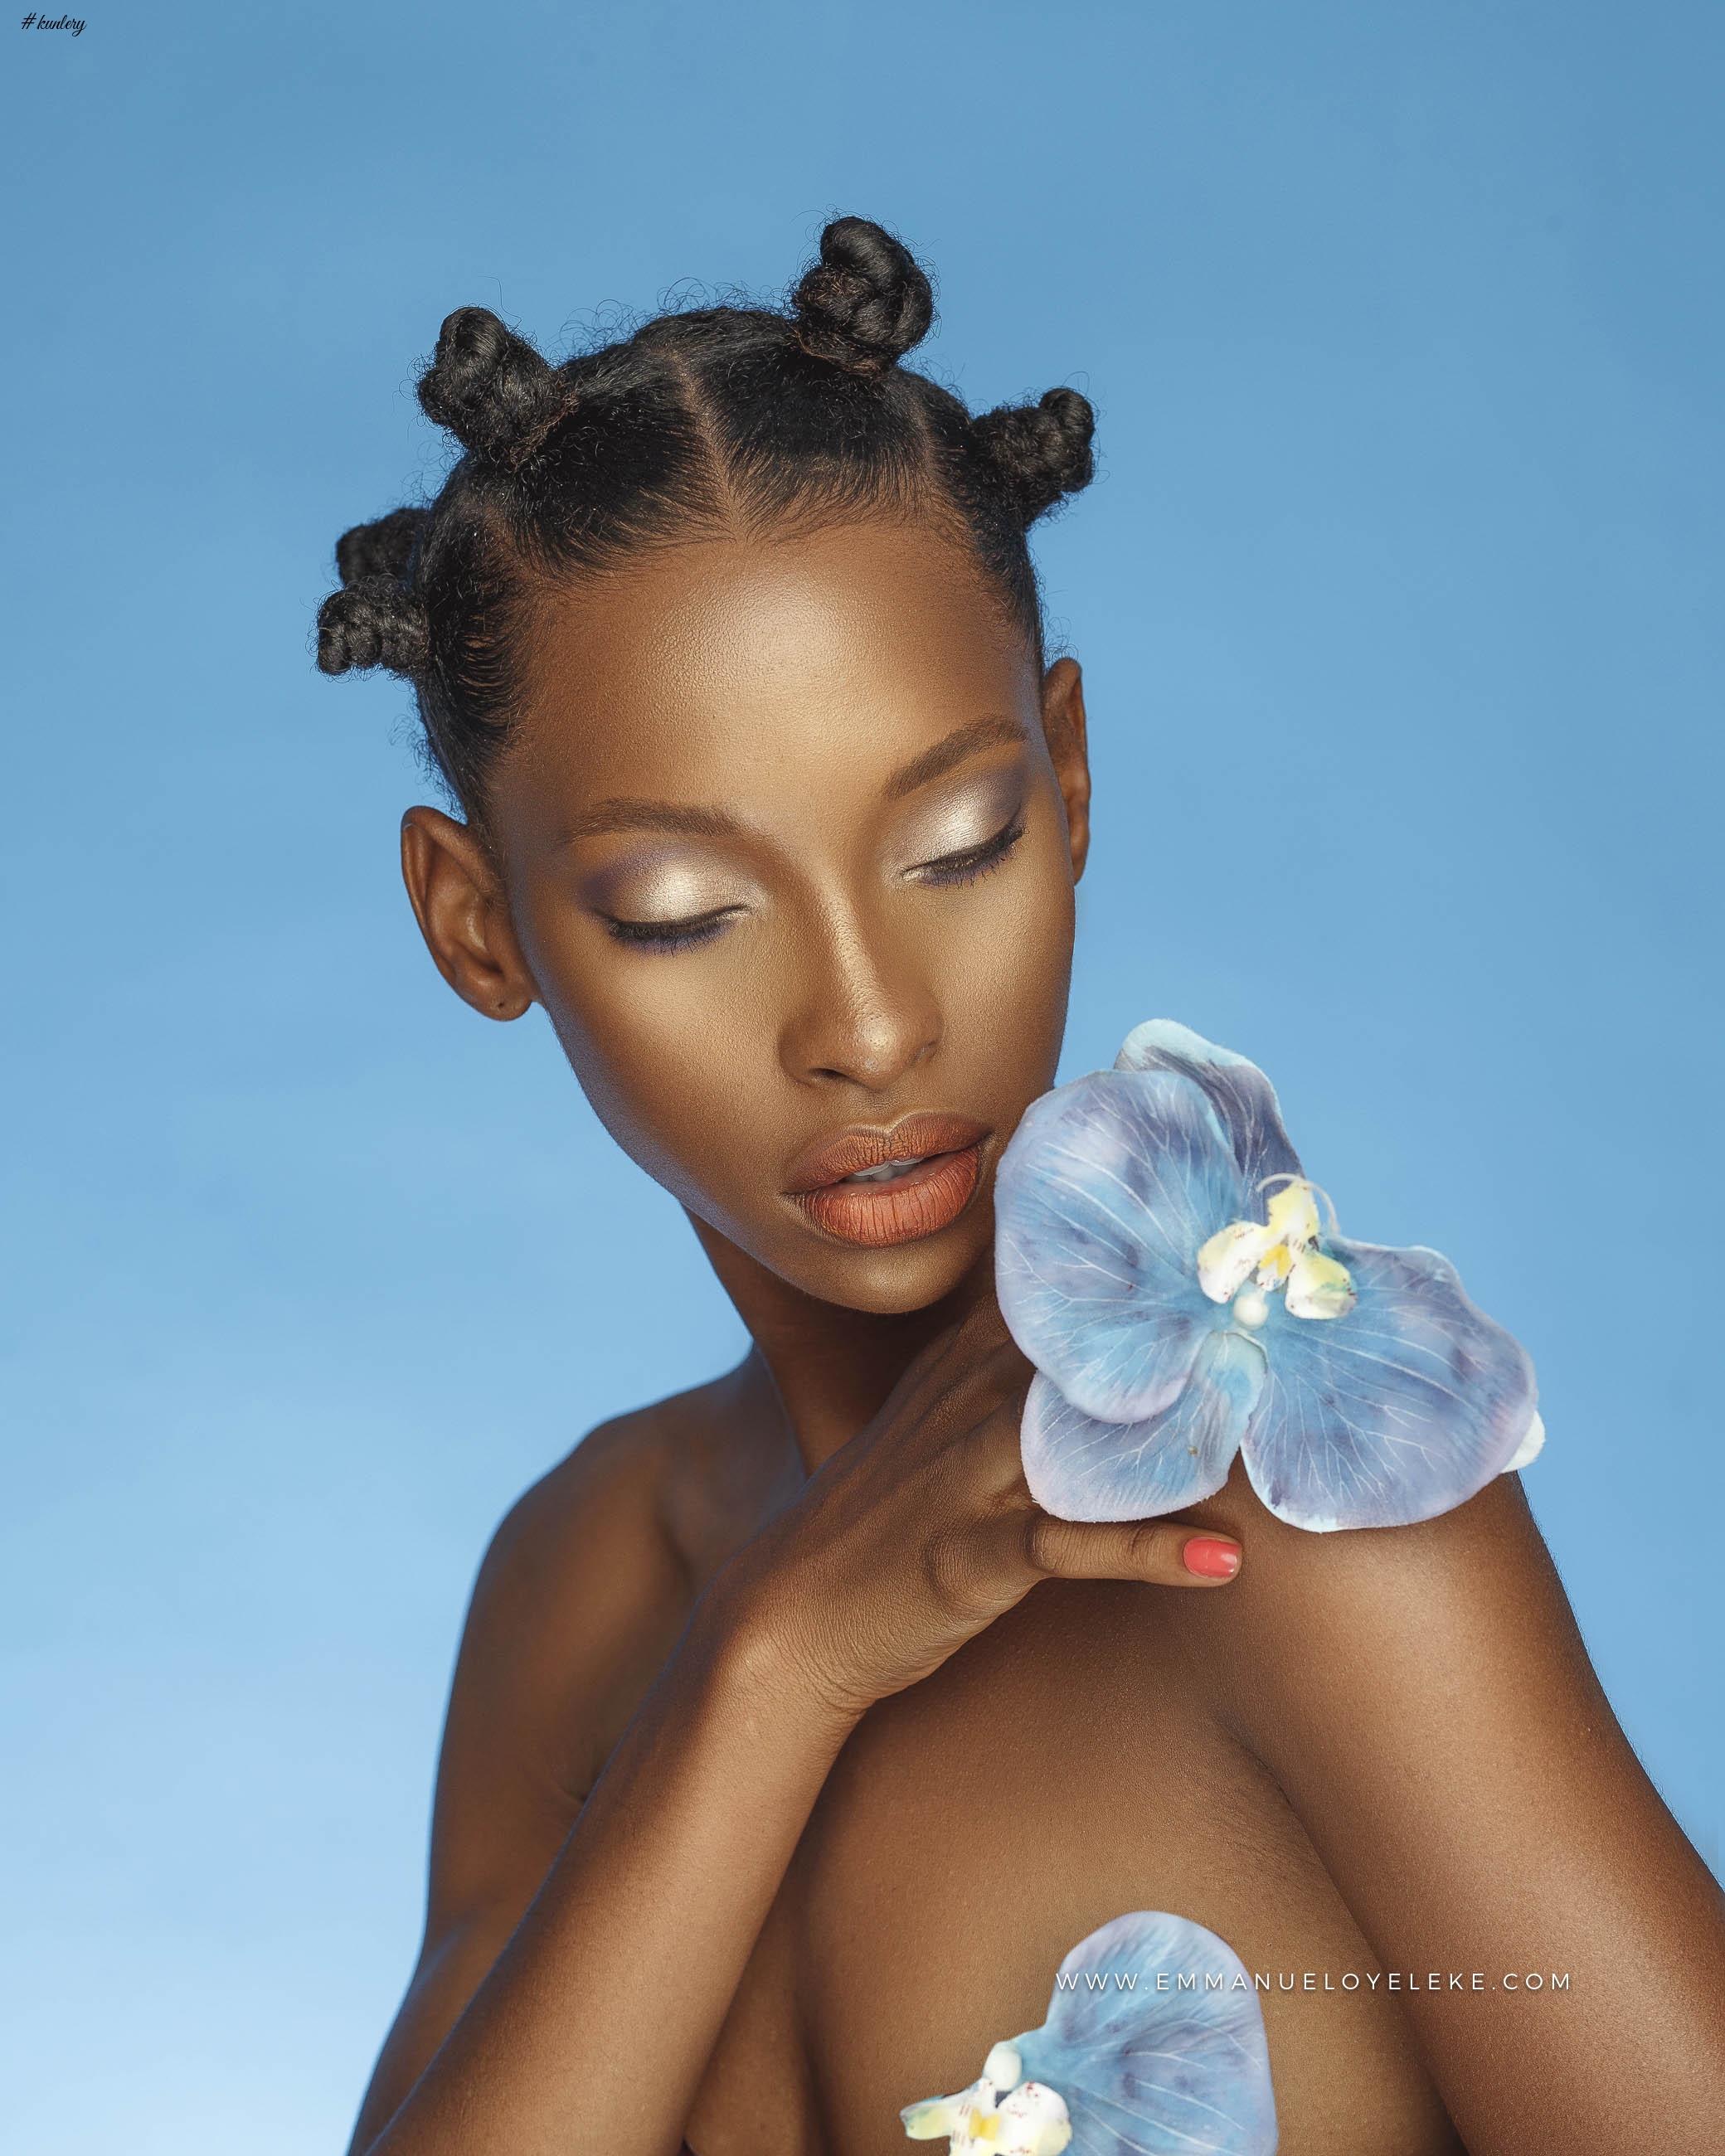 Emmanuel Oyeleke’s Blooming Beauty Shoot Is Everything You Need To See